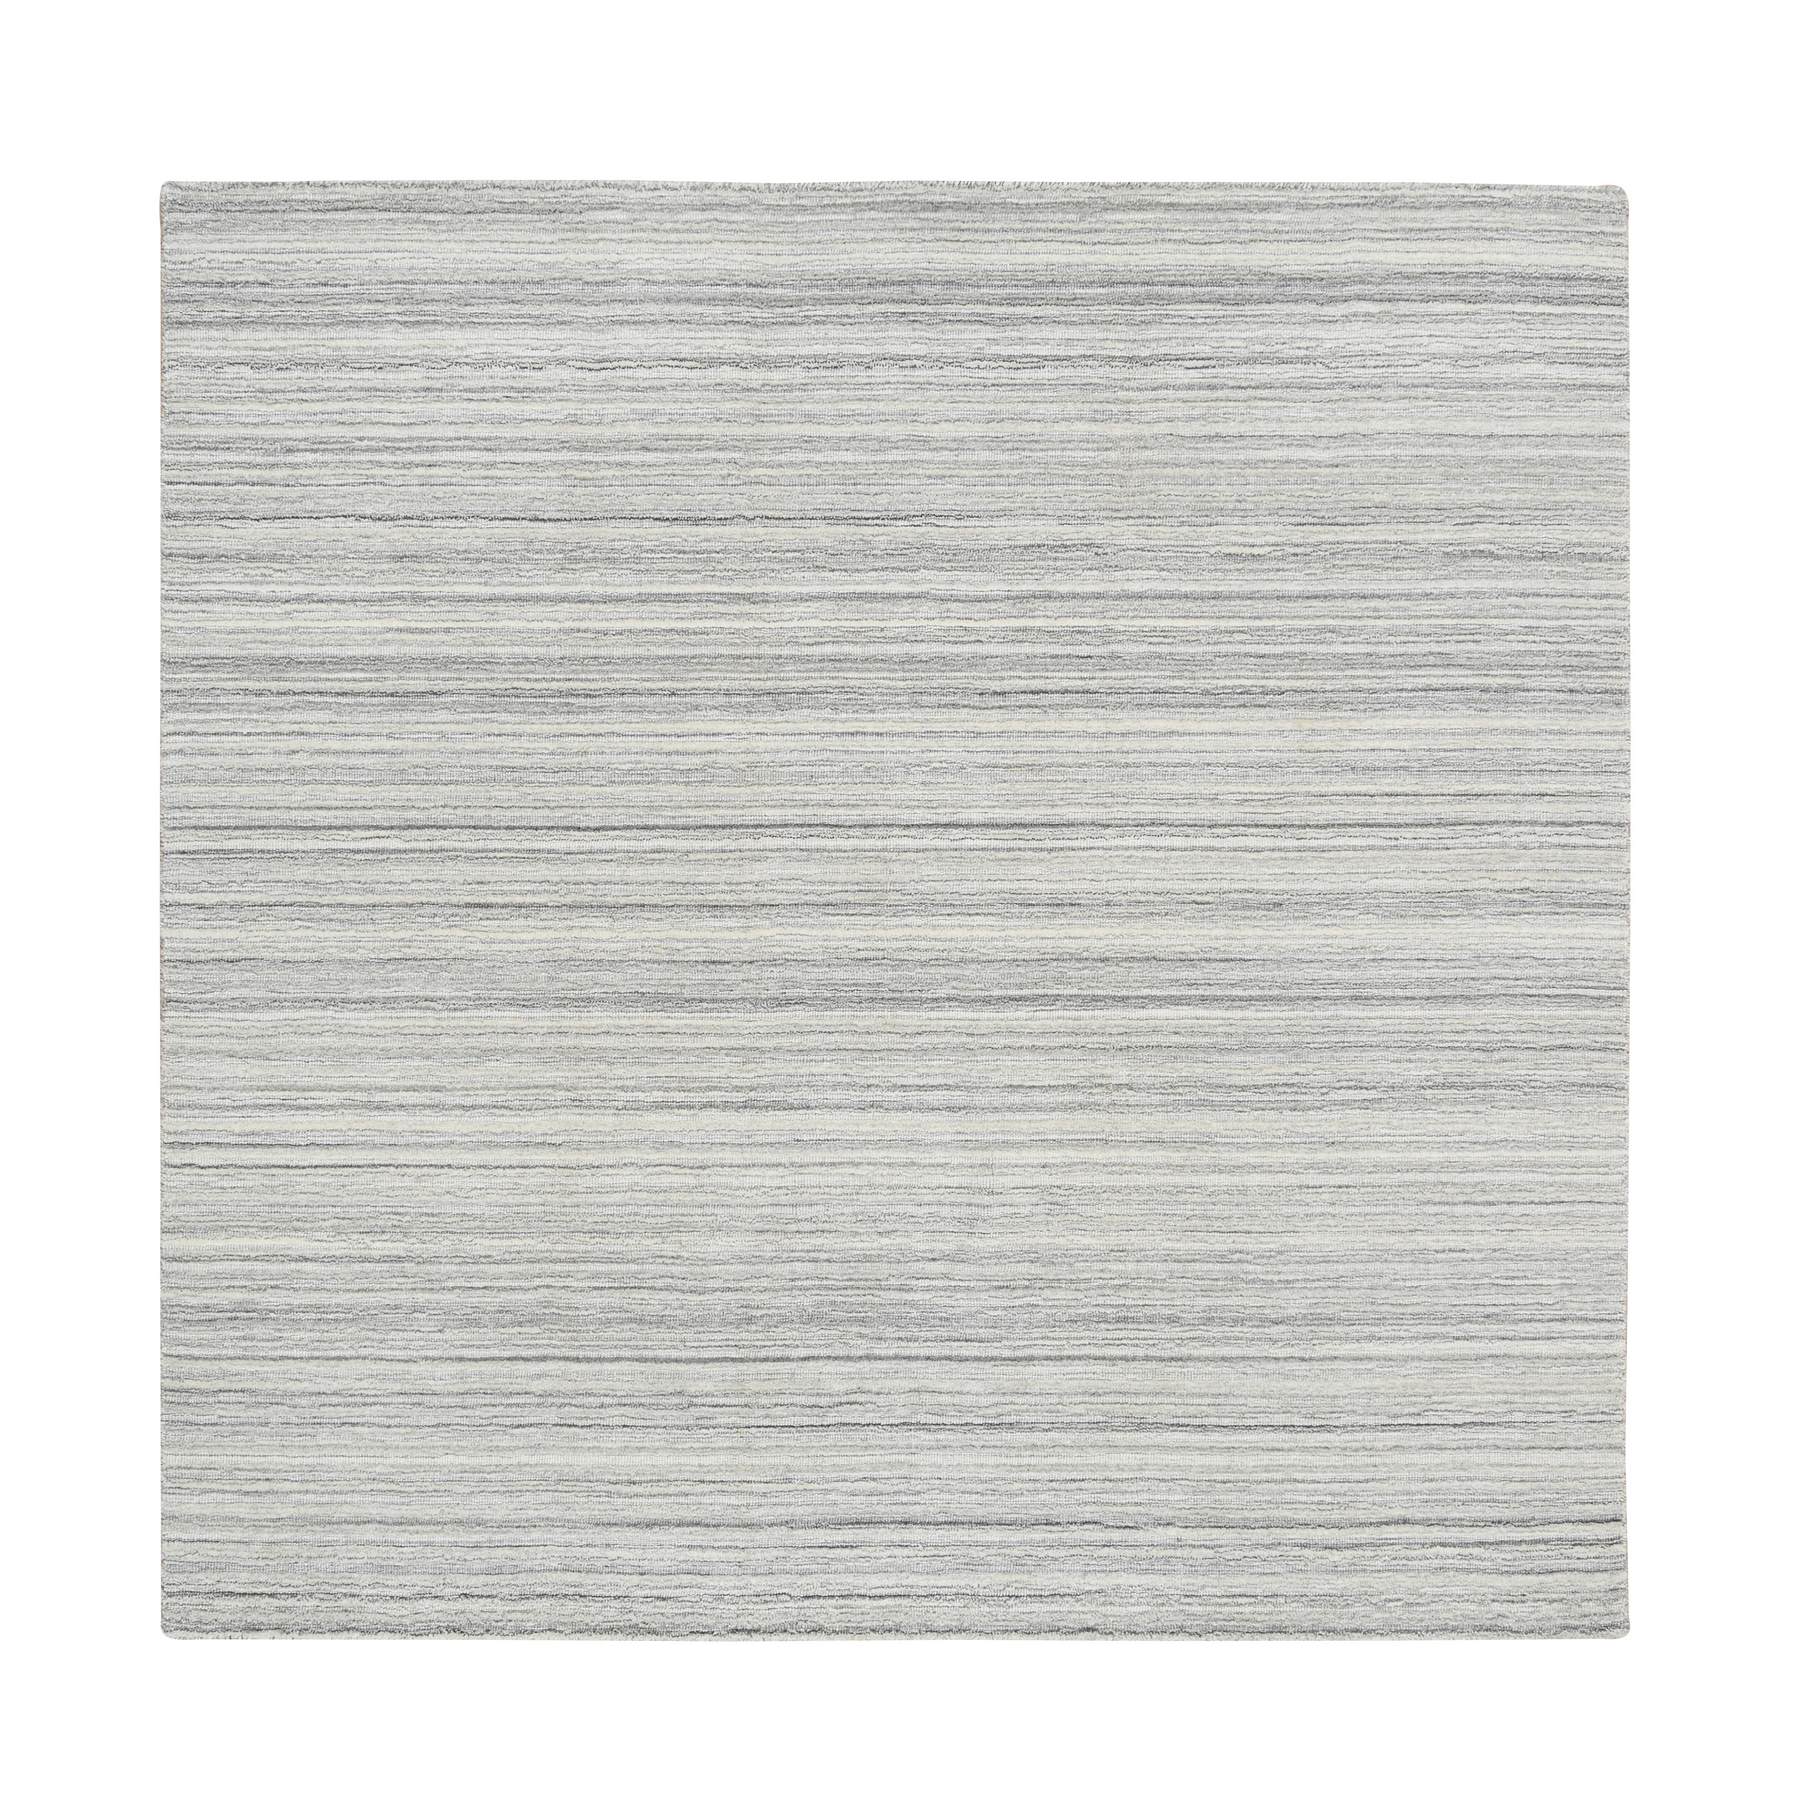 6'x6' Platinum Gray and Cream, Modern Design Thick and Plush, Plain Hand Loomed Undyed Natural Wool, Square Oriental Rug 